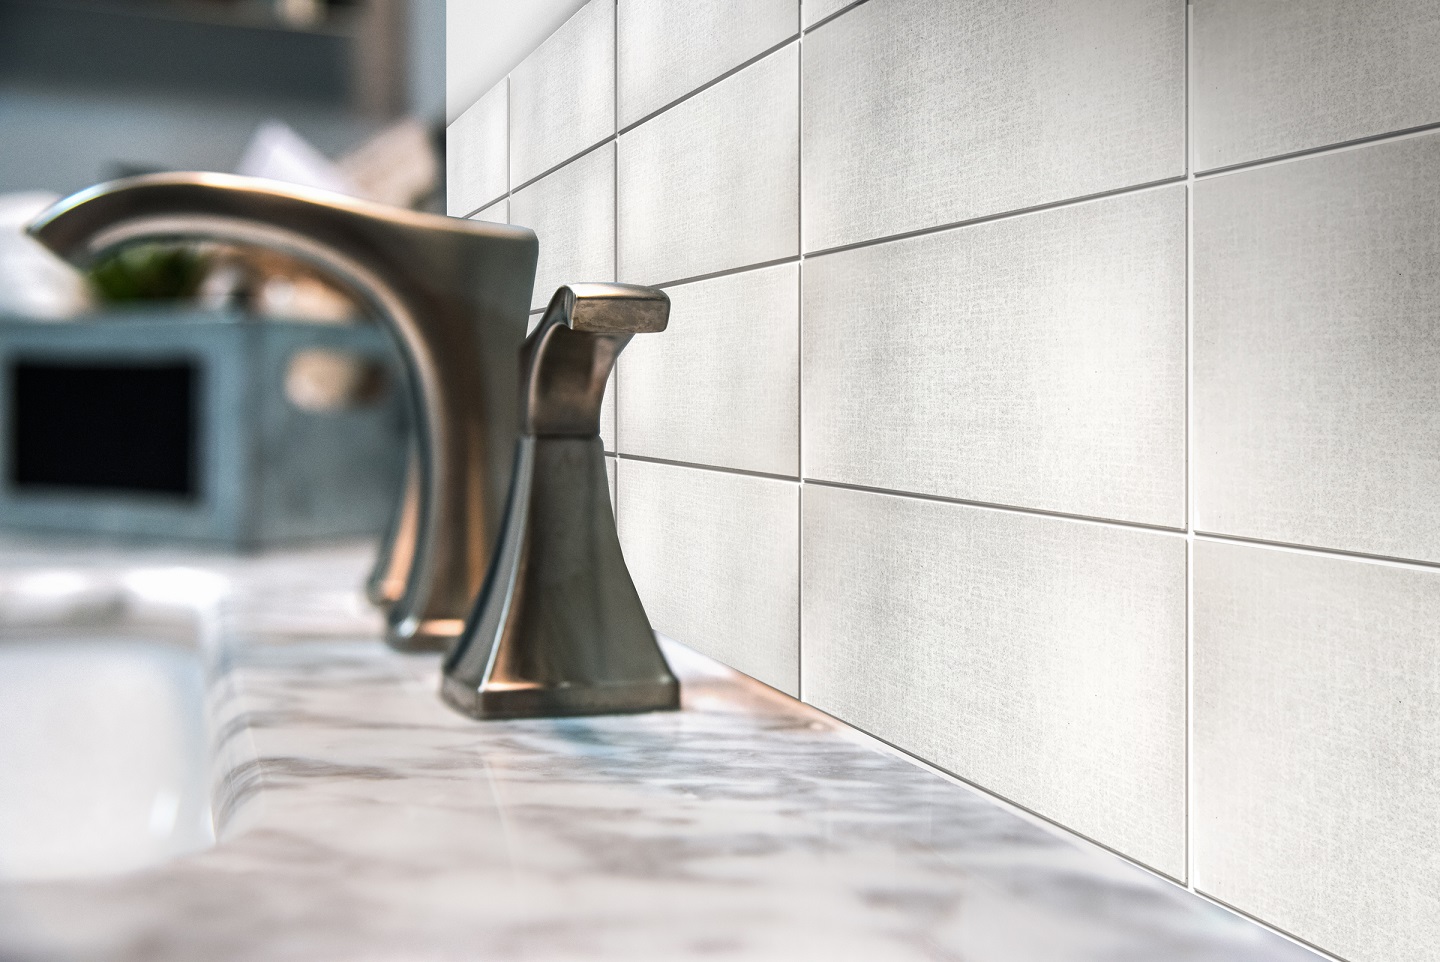 New Tile Styles from Questech